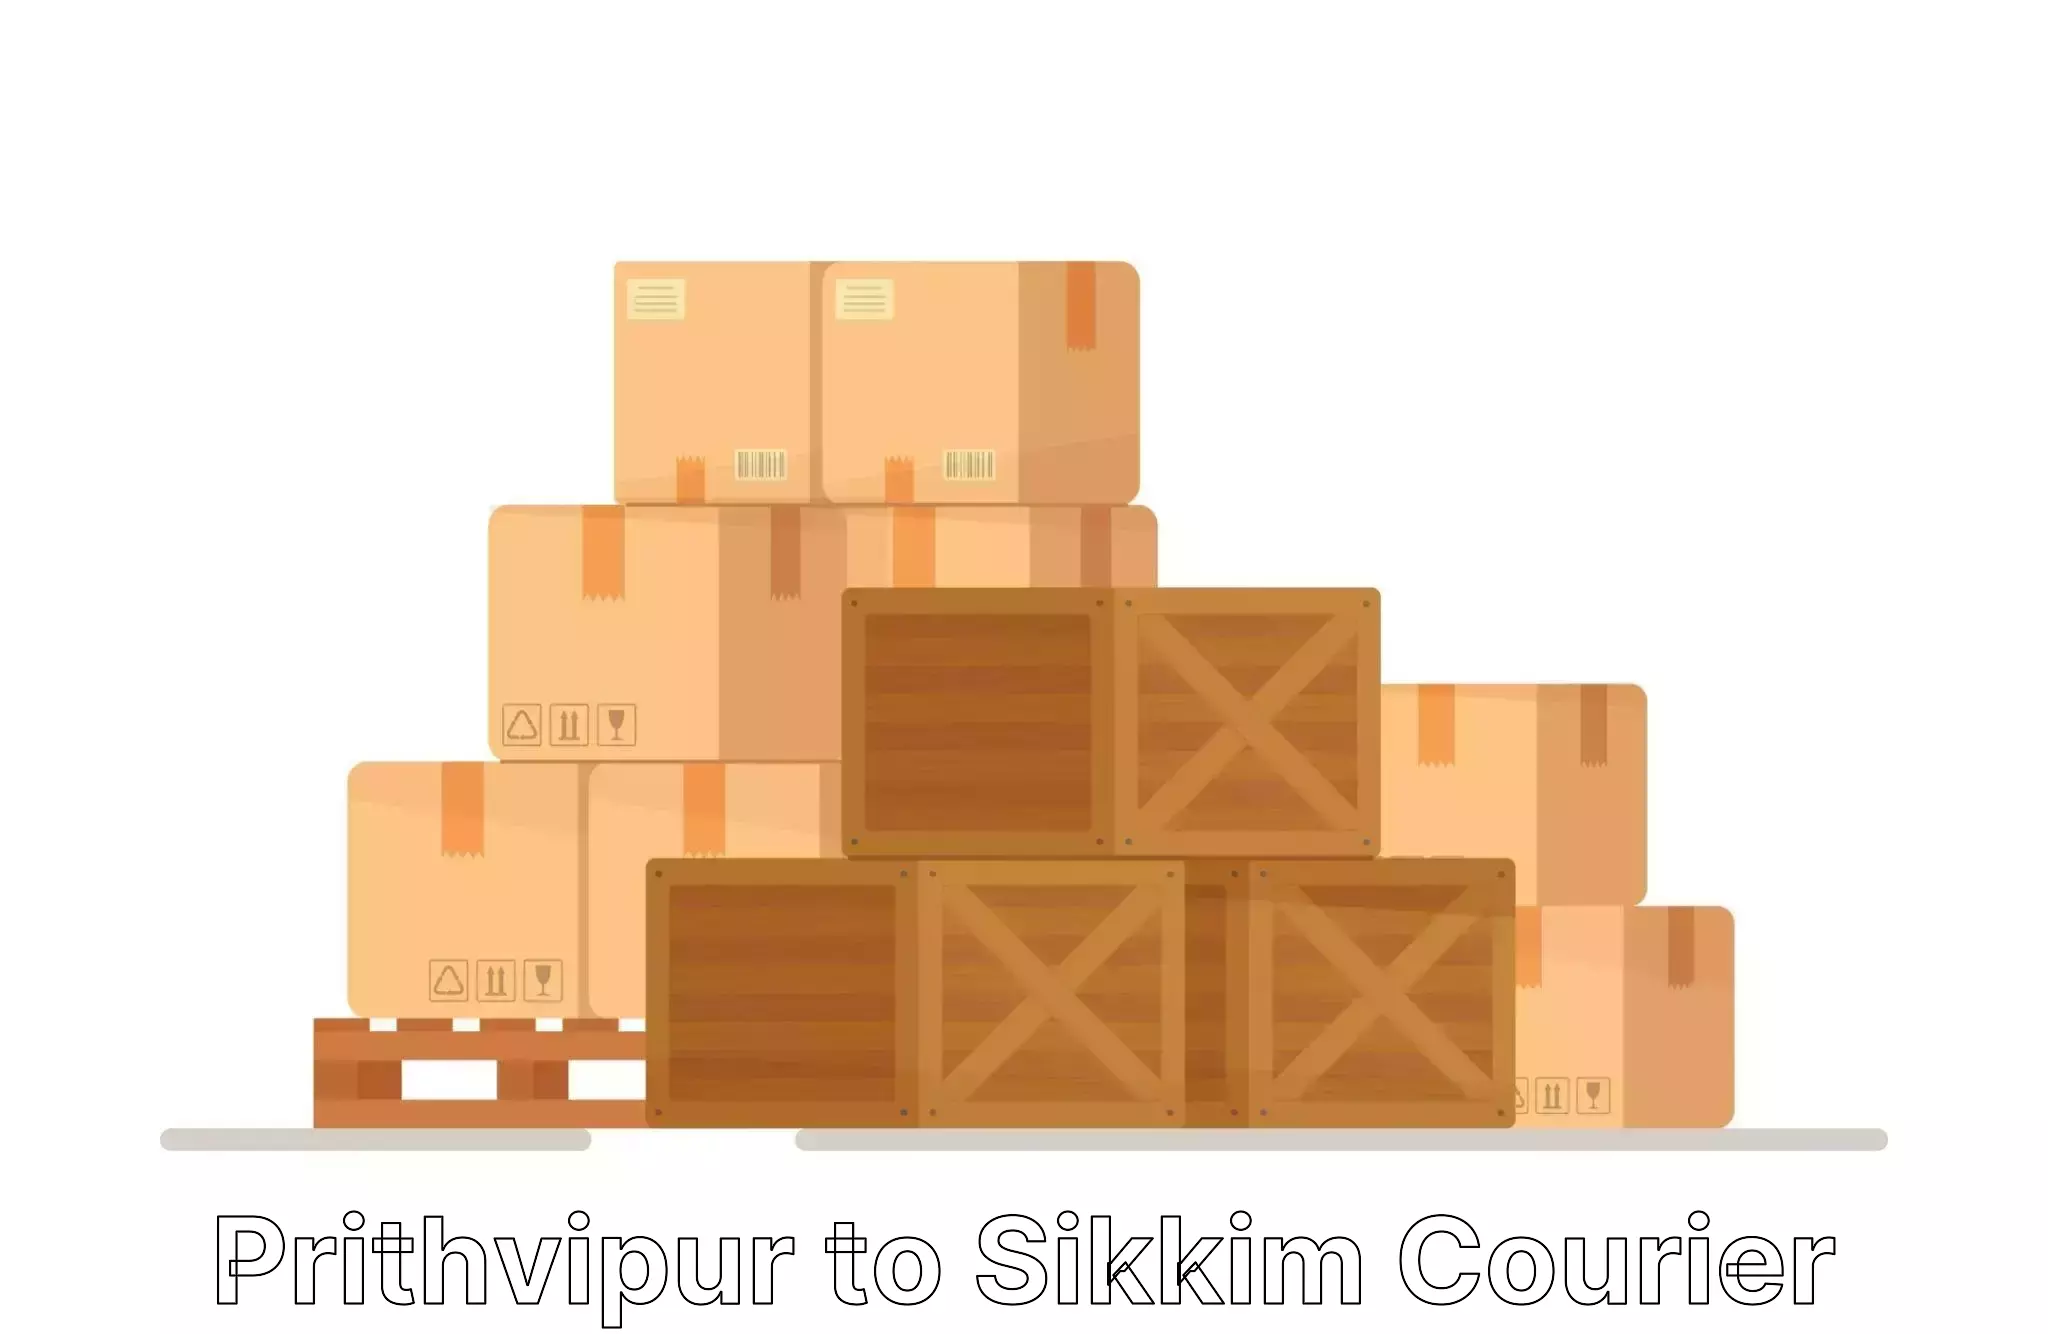 Efficient moving company Prithvipur to North Sikkim